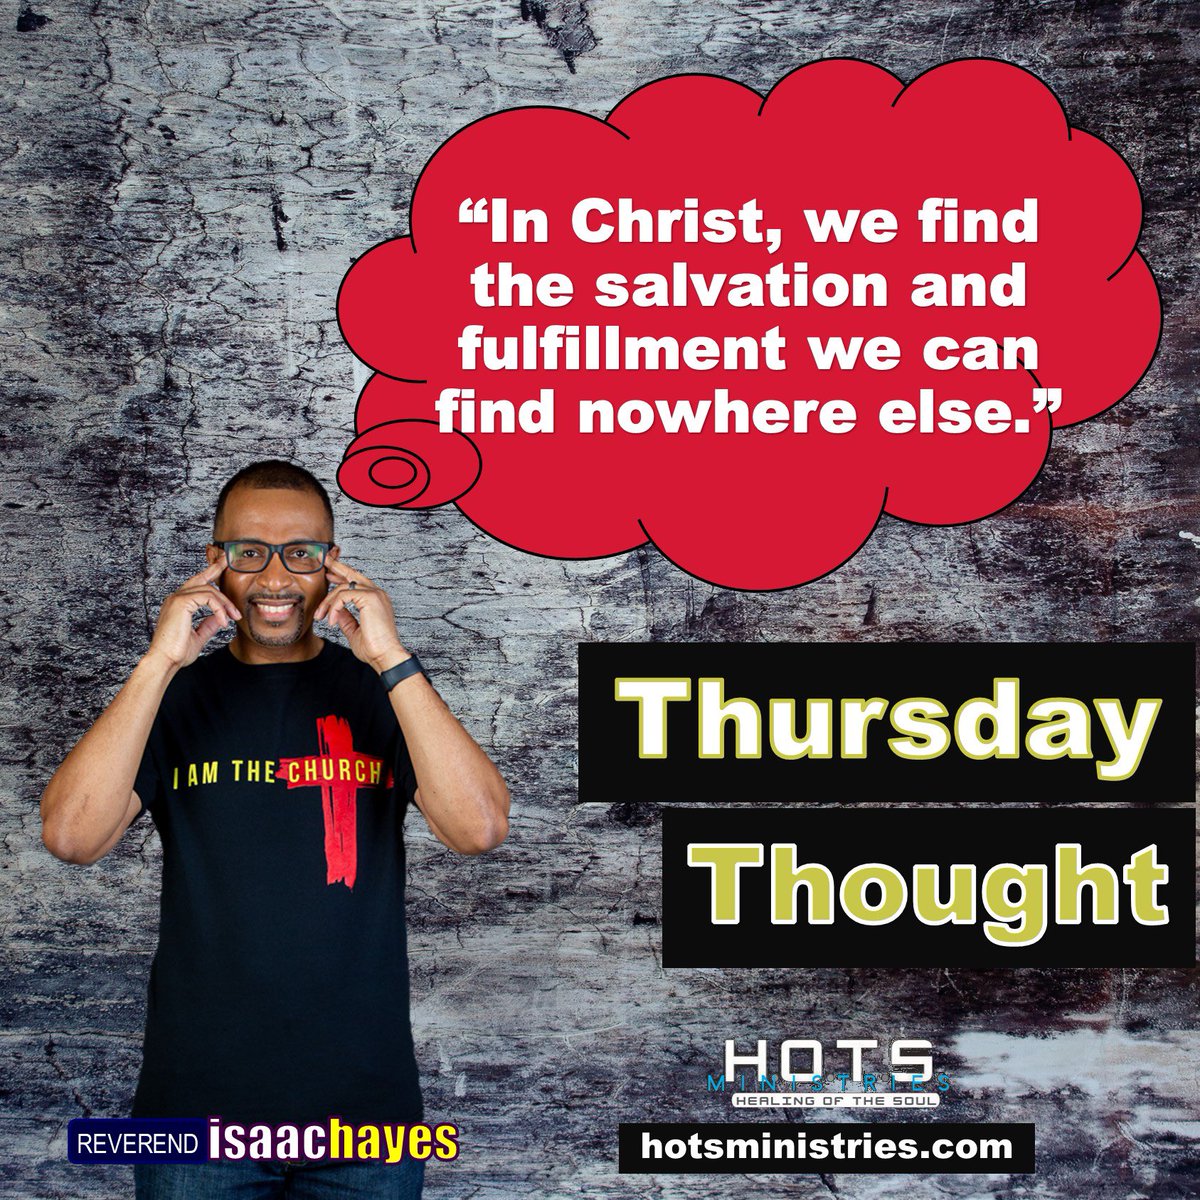 How are you enjoying the life Christ offers? #TriumphOfTruth #MorningManna #HOTSMinistries #ThursdayThought #Direction #Disclosure #Deliverance